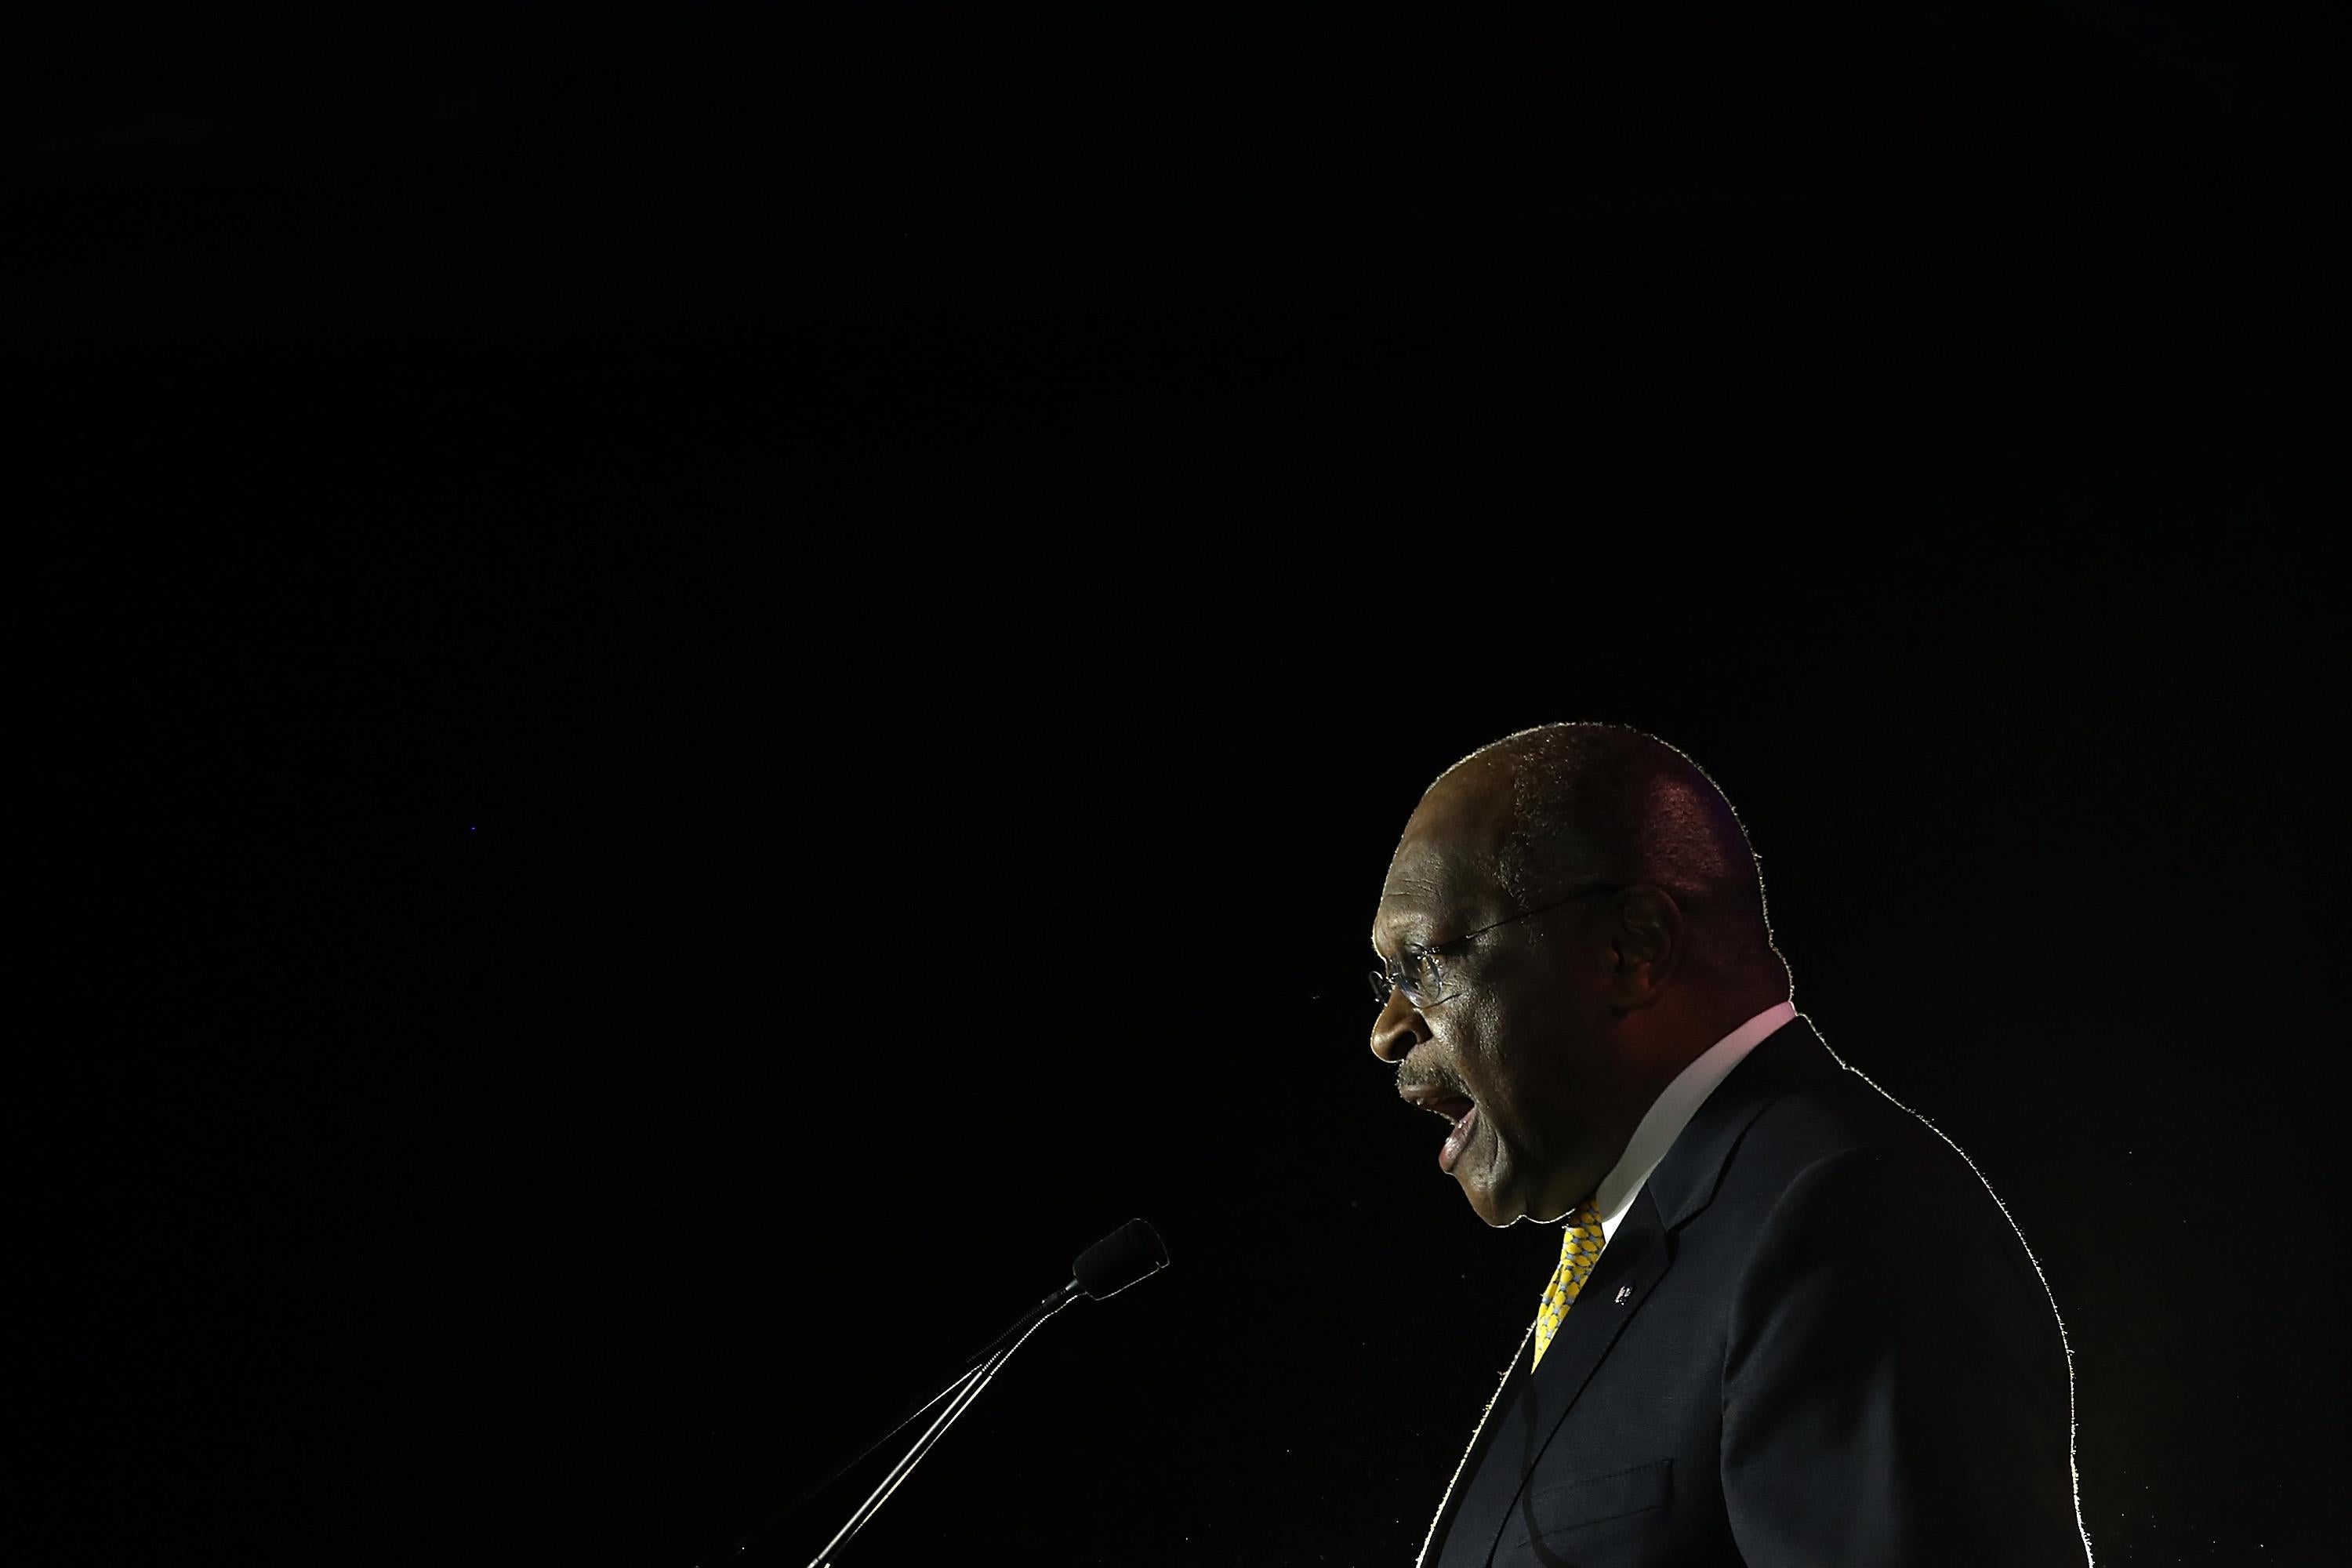 Herman Cain, in profile, speaking at a podium.